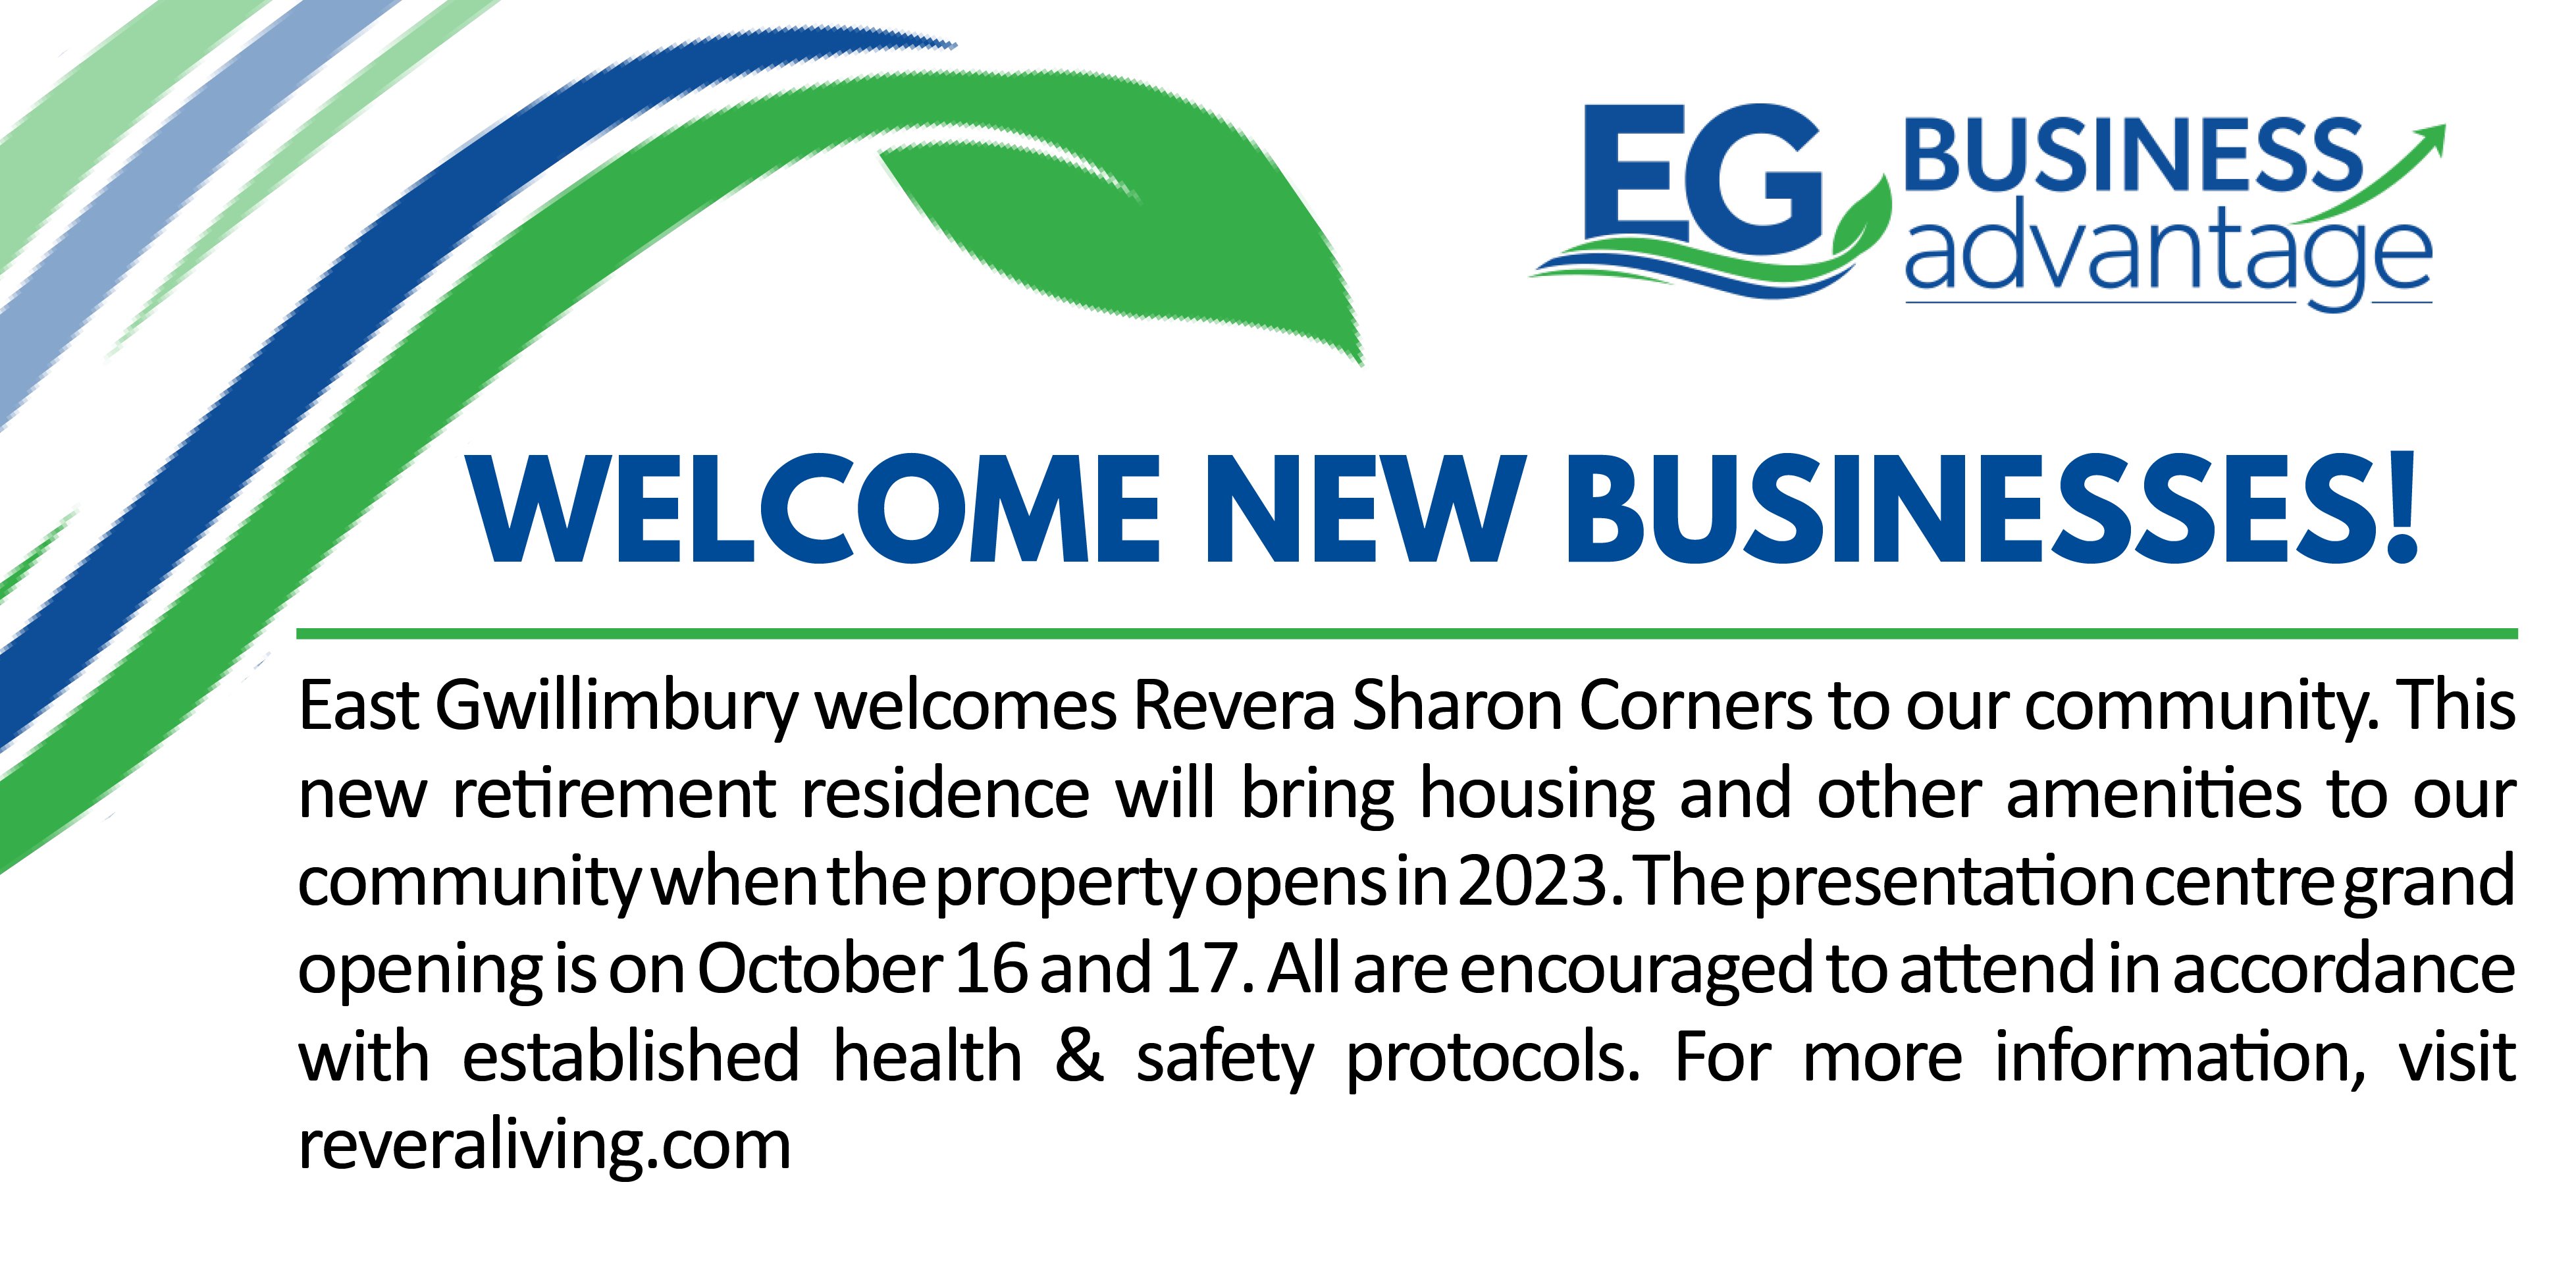 Welcome to New Business Ad - Revera Sharon Corners